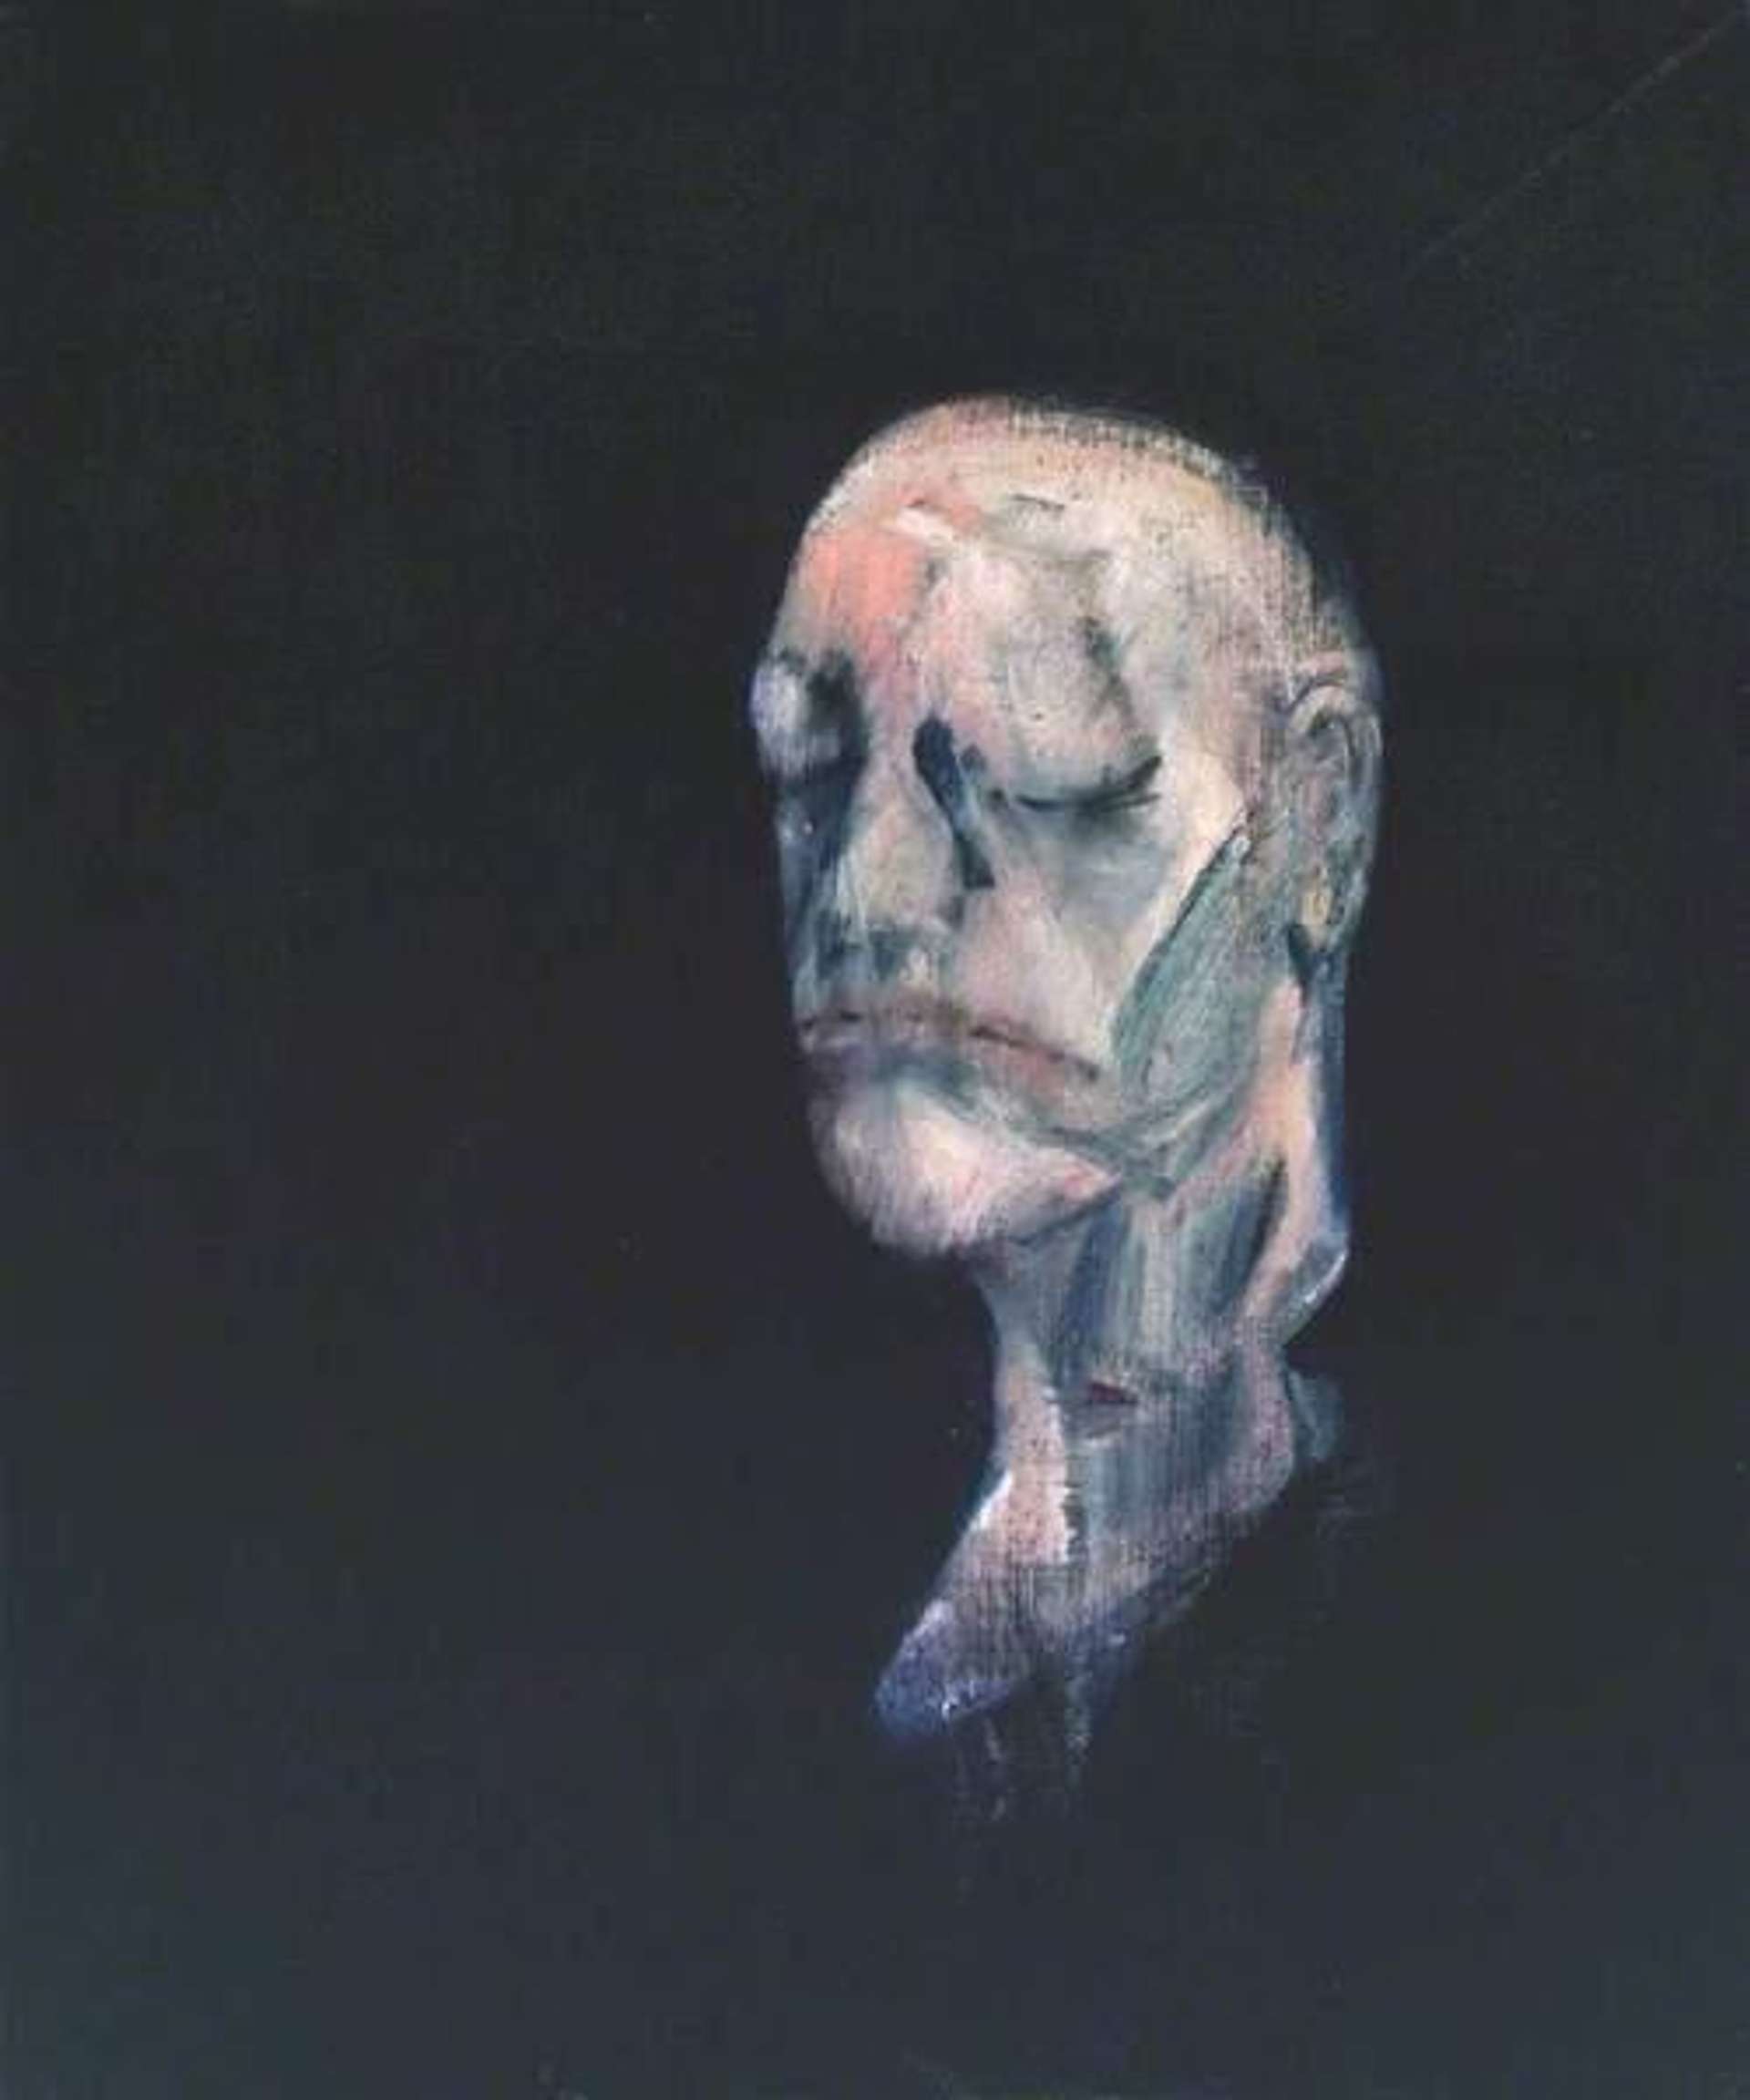 Francis Bacon: After Study Of Portrait Head Based On The Life Mask Of William Blake - Signed Print